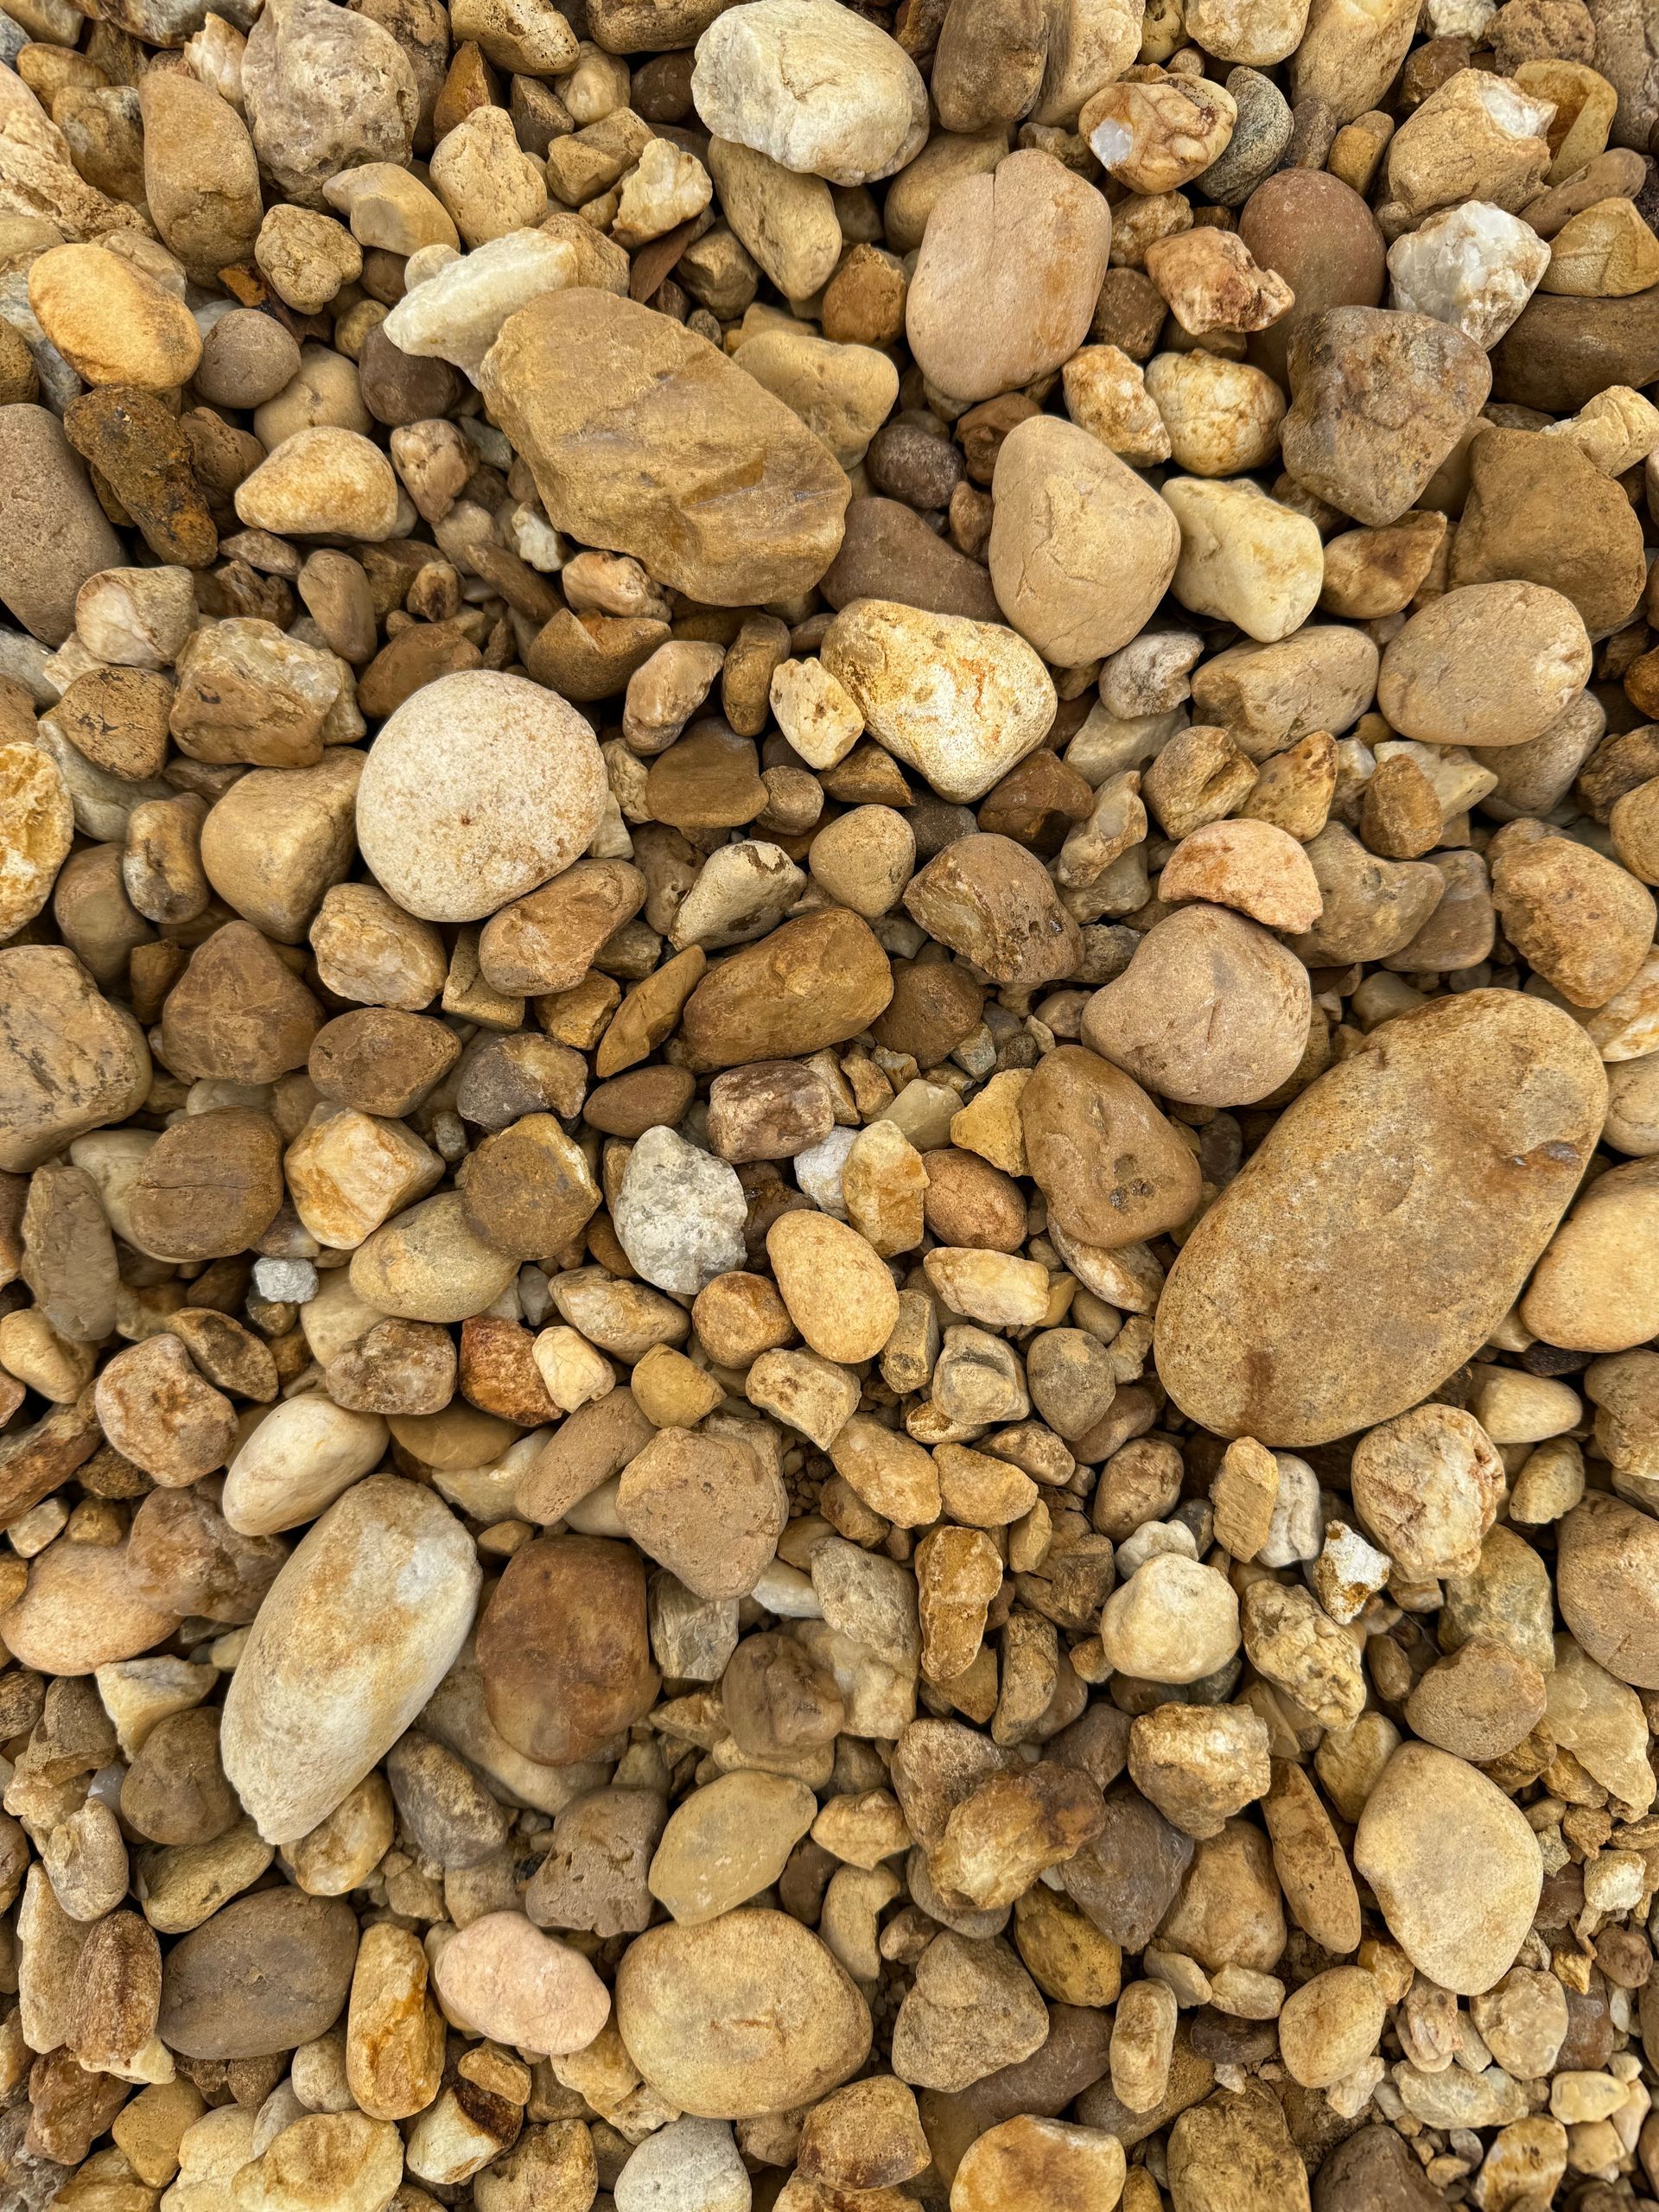 Washed sea shell - Gravel Products in Florida